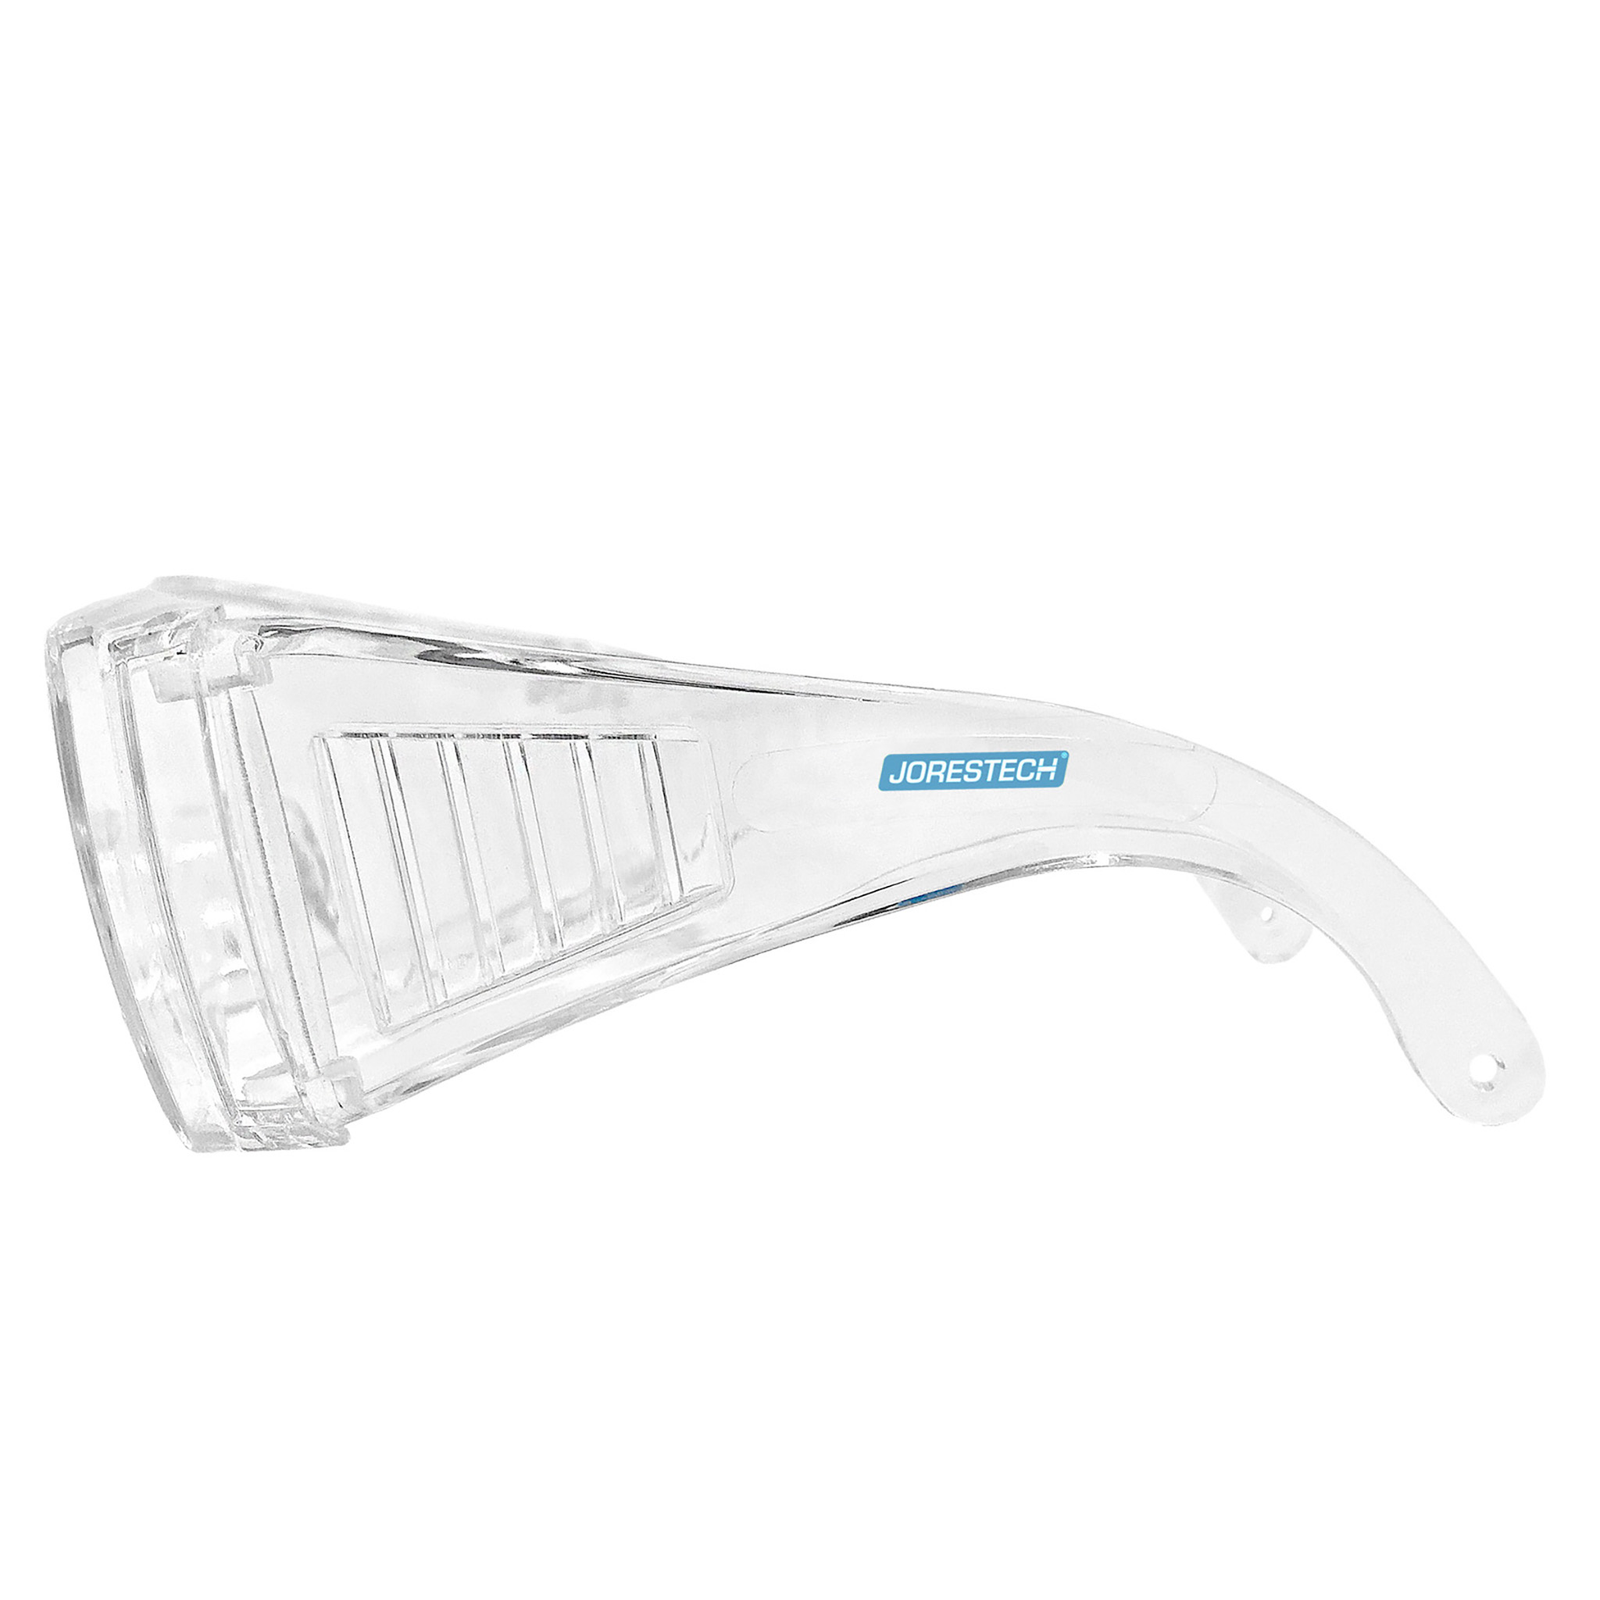 Side view of the clear Jorestech safety glasses for high impact protection on a white background